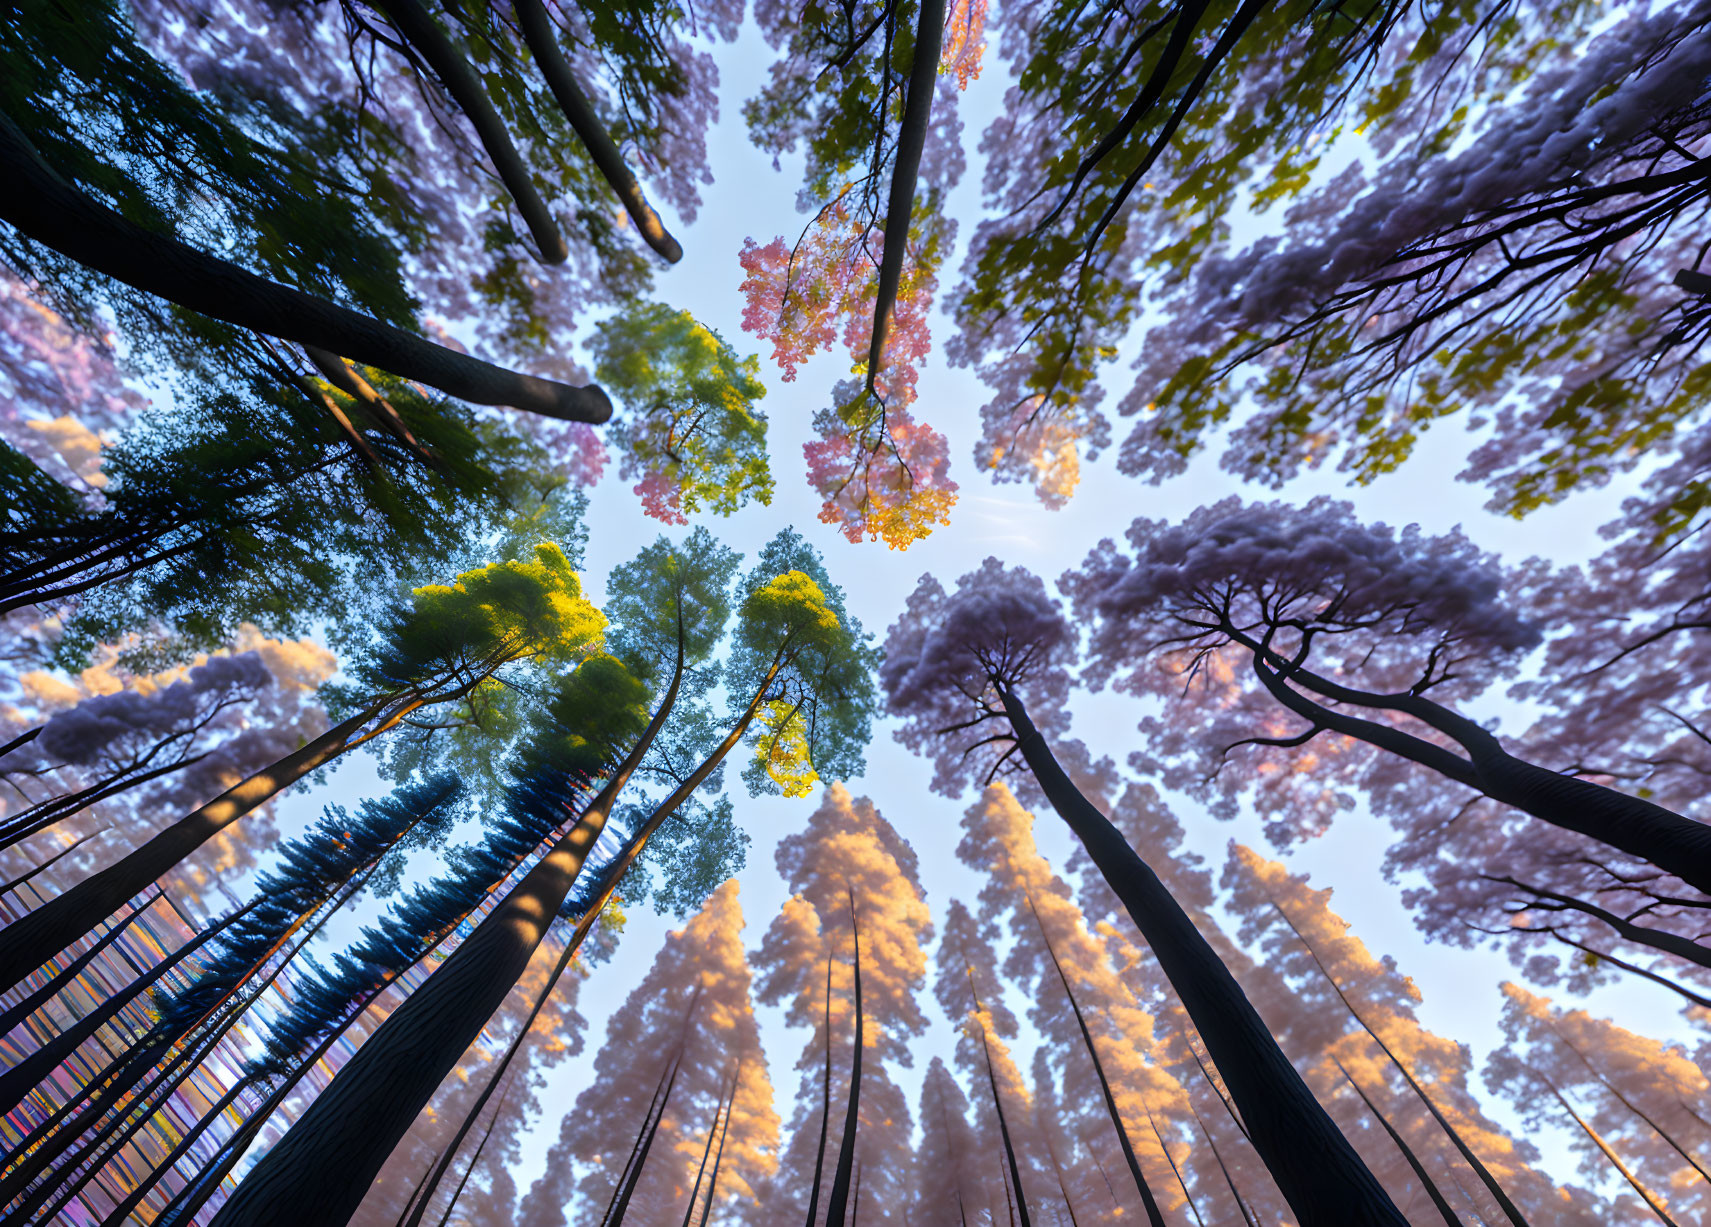 Forest canopy view: tall trees, colorful leaves, clear sky - nature's beauty and height.